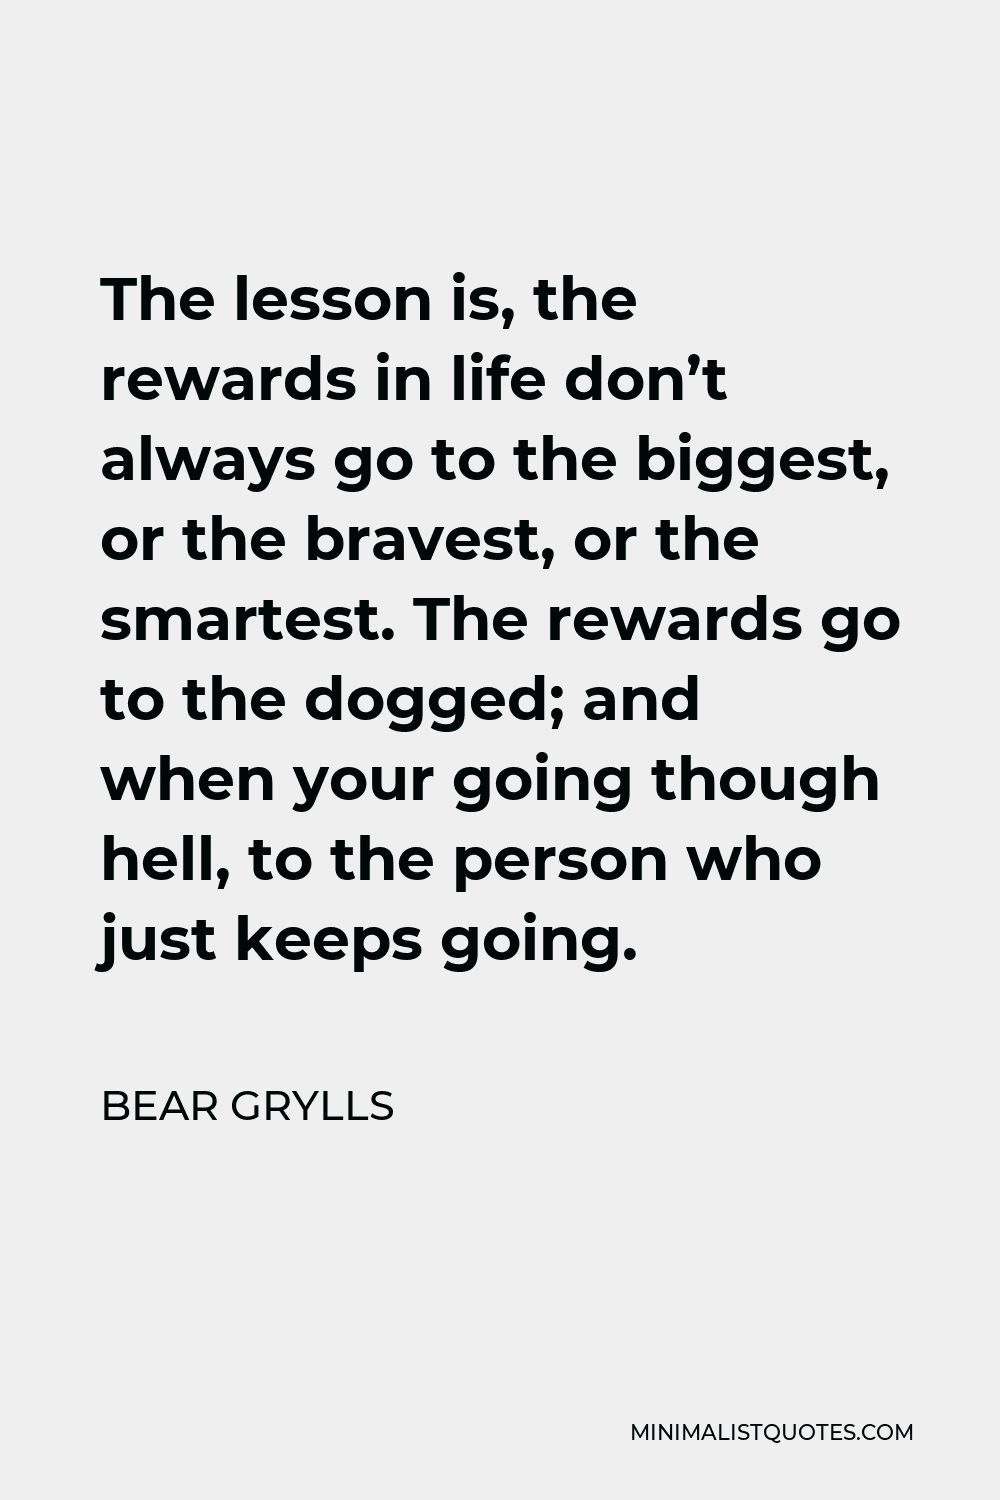 Bear Grylls Quote - The lesson is, the rewards in life don’t always go to the biggest, or the bravest, or the smartest. The rewards go to the dogged; and when your going though hell, to the person who just keeps going.